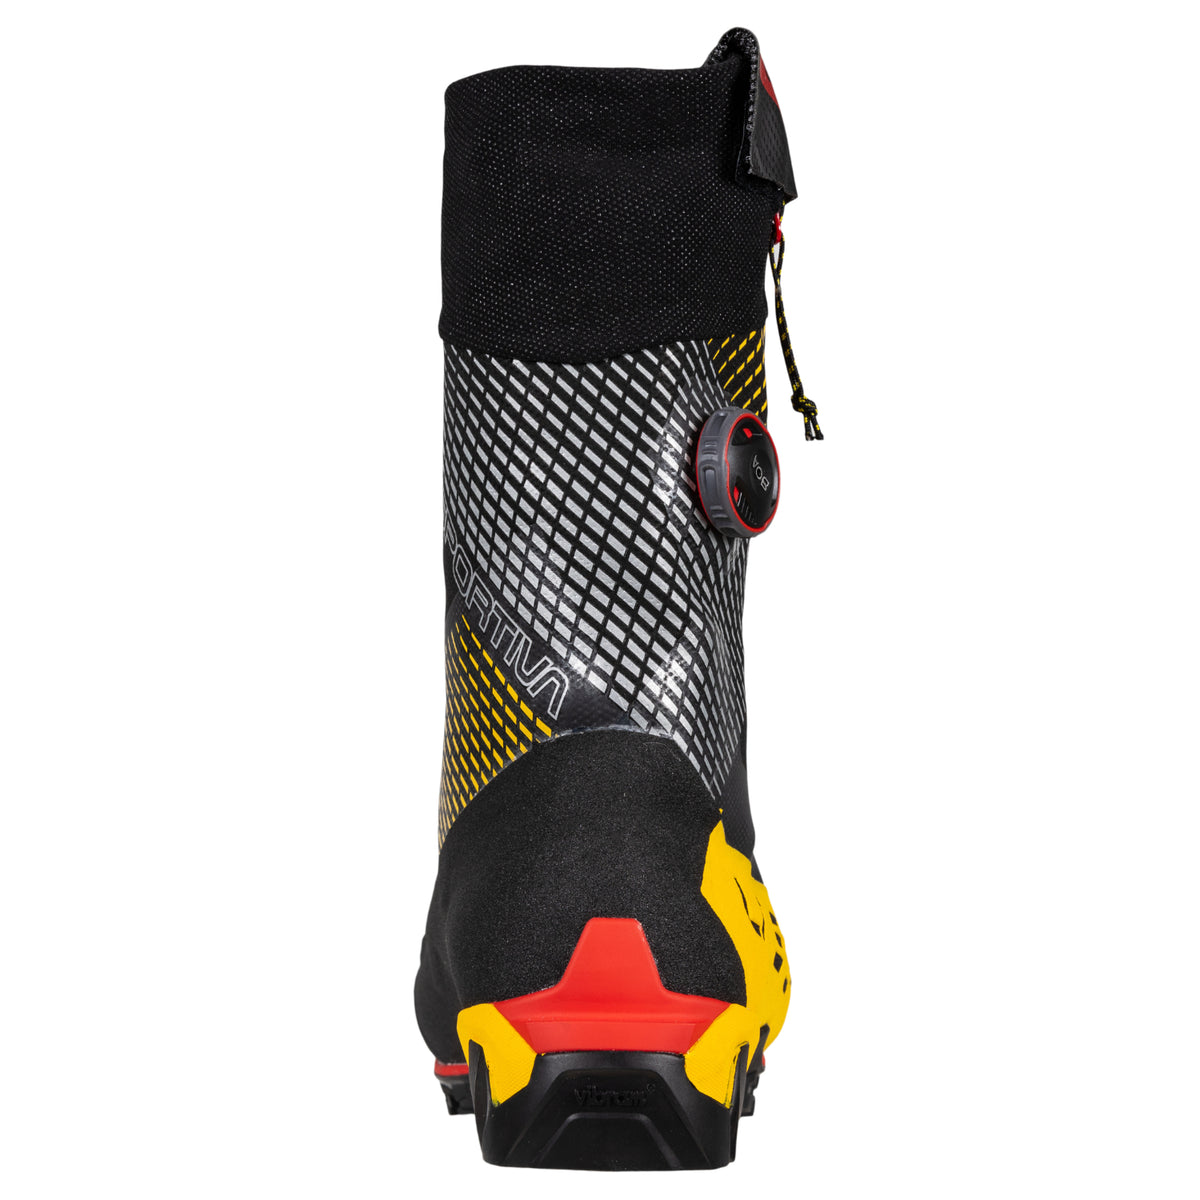 La Sportiva G-Tech mountaineering boots in black red and yellow, showing heel